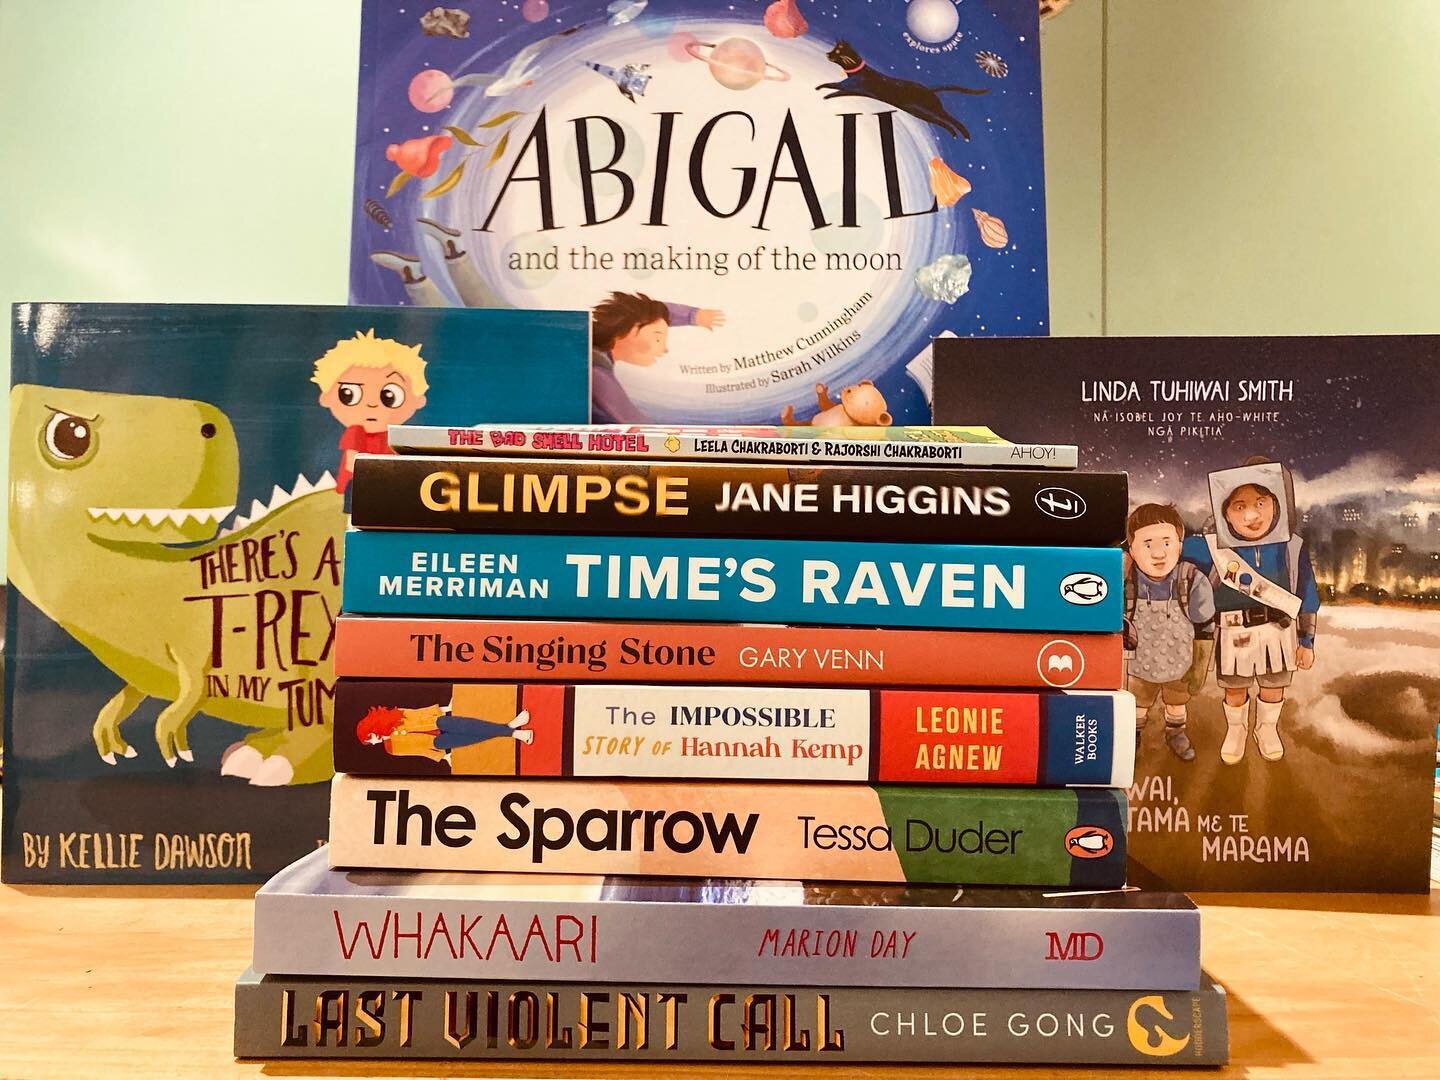 Explore this great selection of new NZ titles that have recently hit the shelves. There&rsquo;s adventure, time travel, the supernatural, magical realism, historical fiction, moon adventures, T-Rex uncertainty, murder mystery and fartbits. #bookshop 